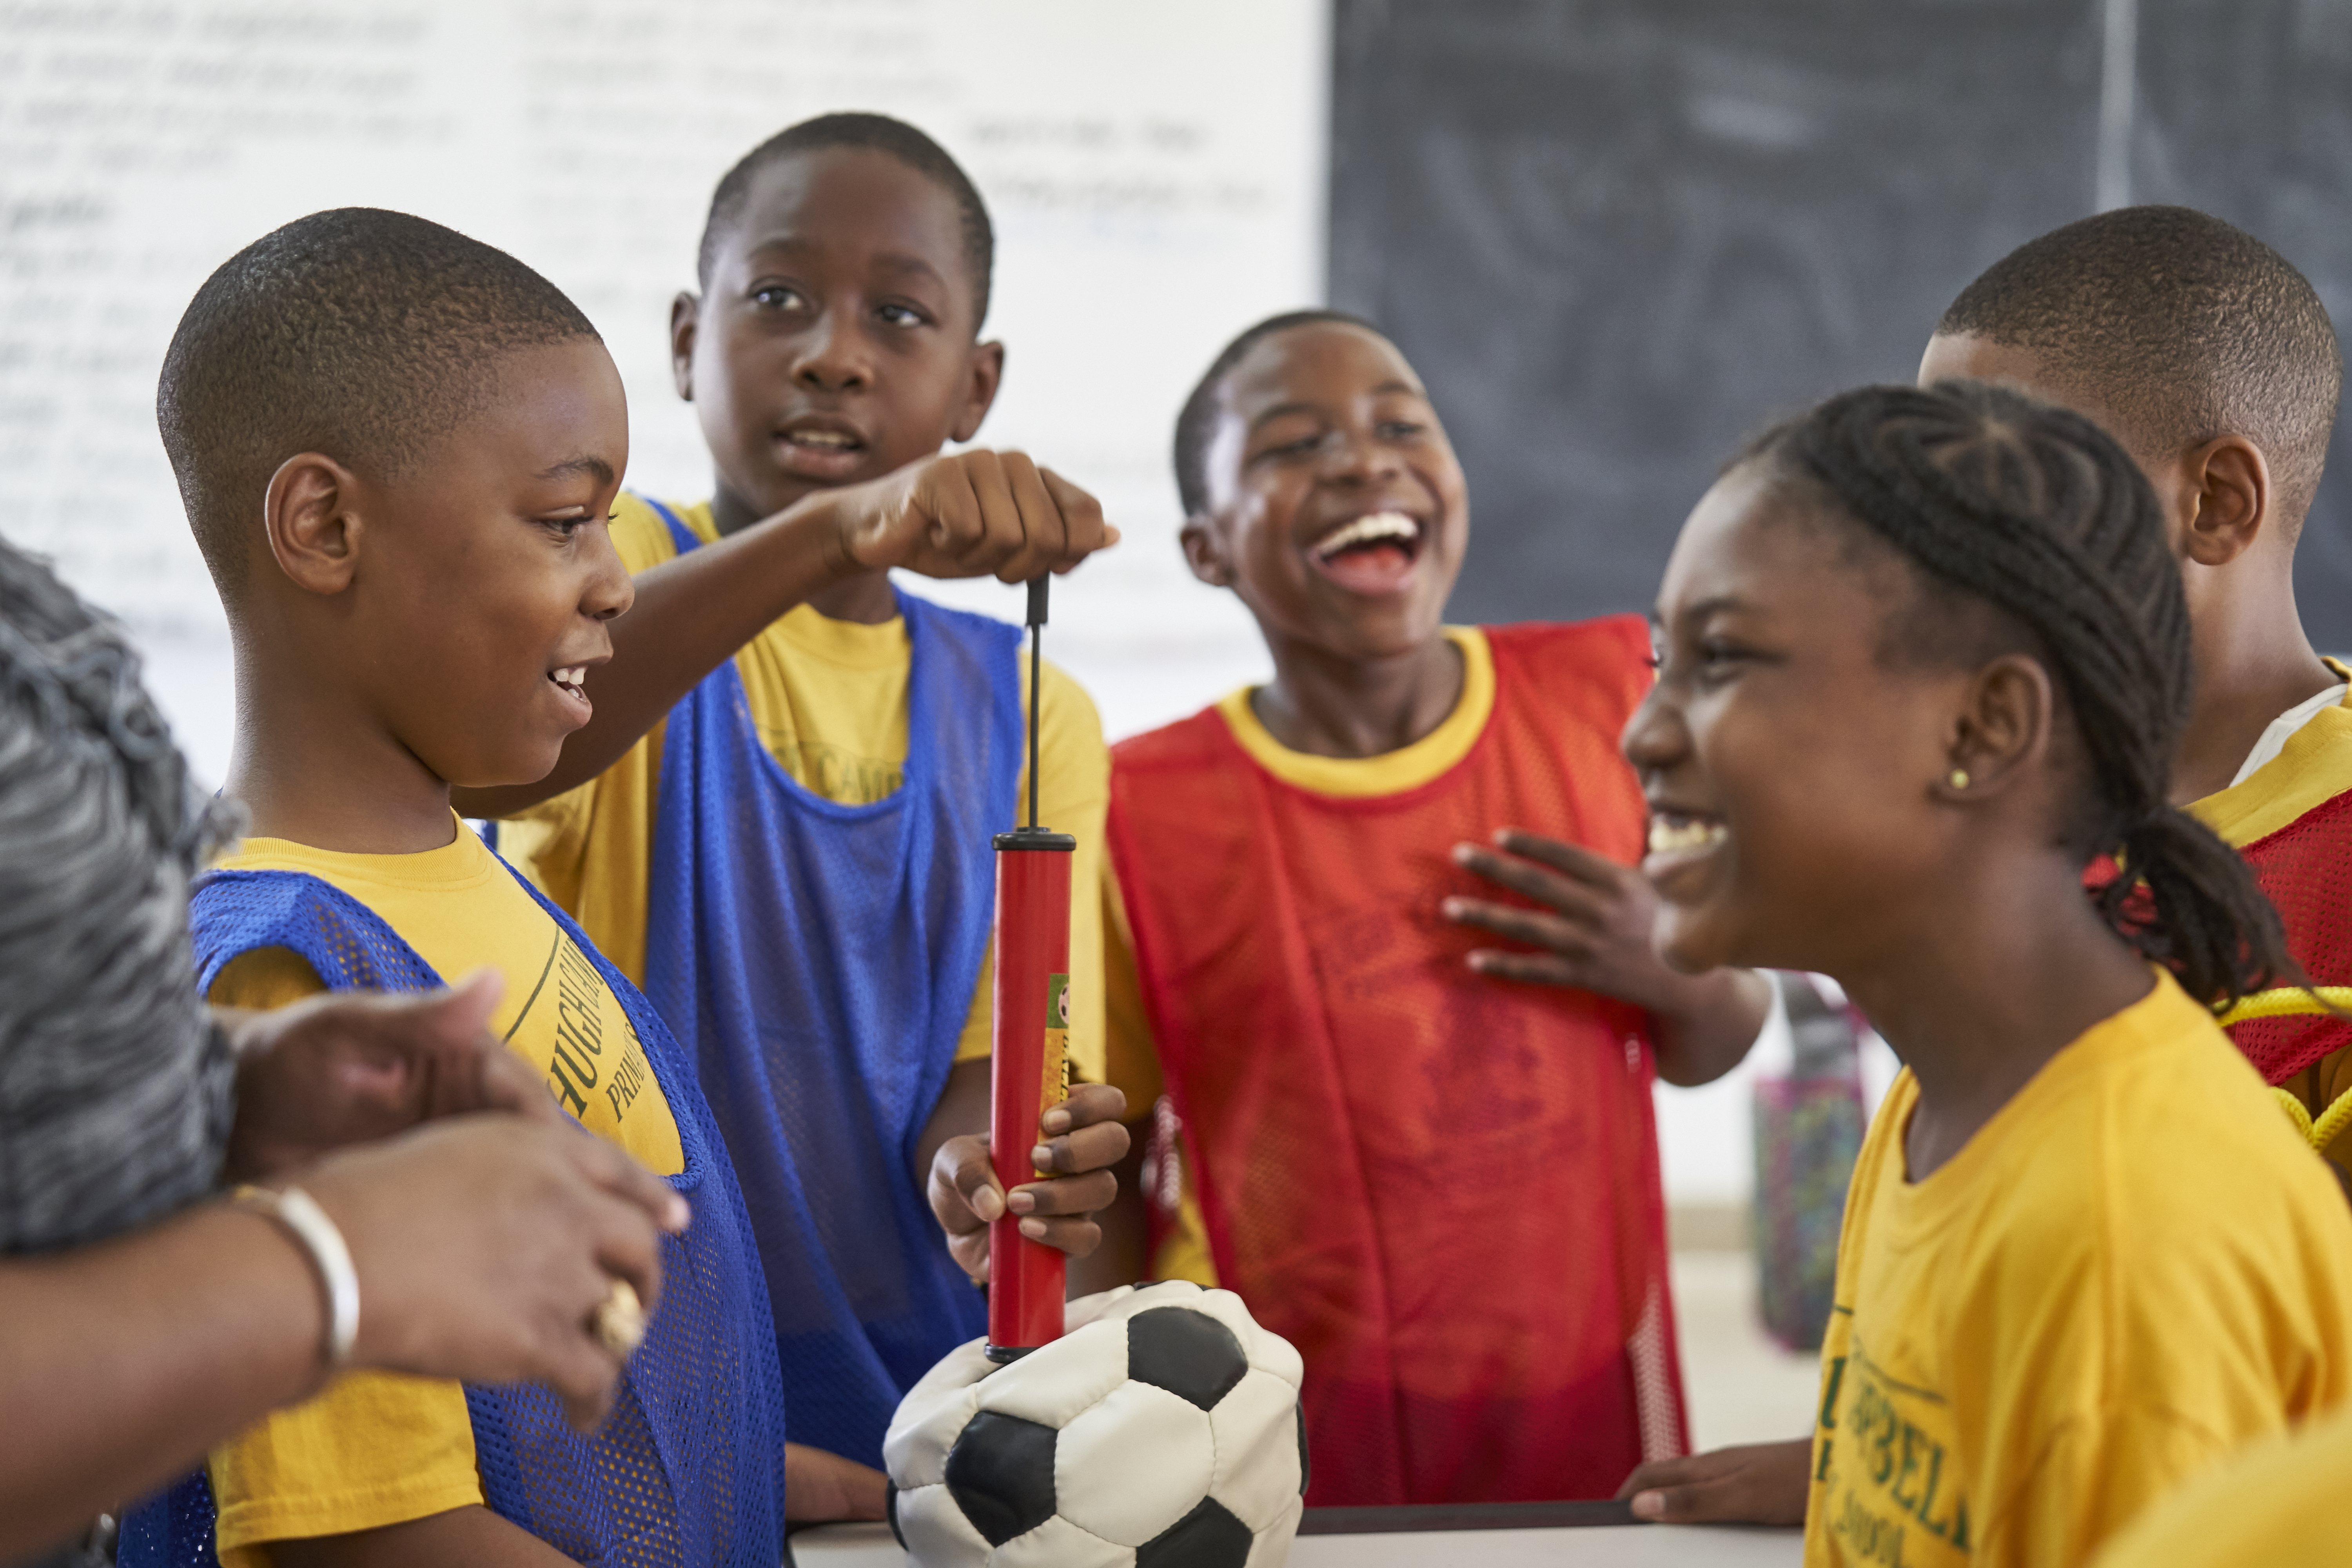 On 11 December in The Bahamas, children inflate a soccer ball, at Abaco Central Primary School in Abaco. 